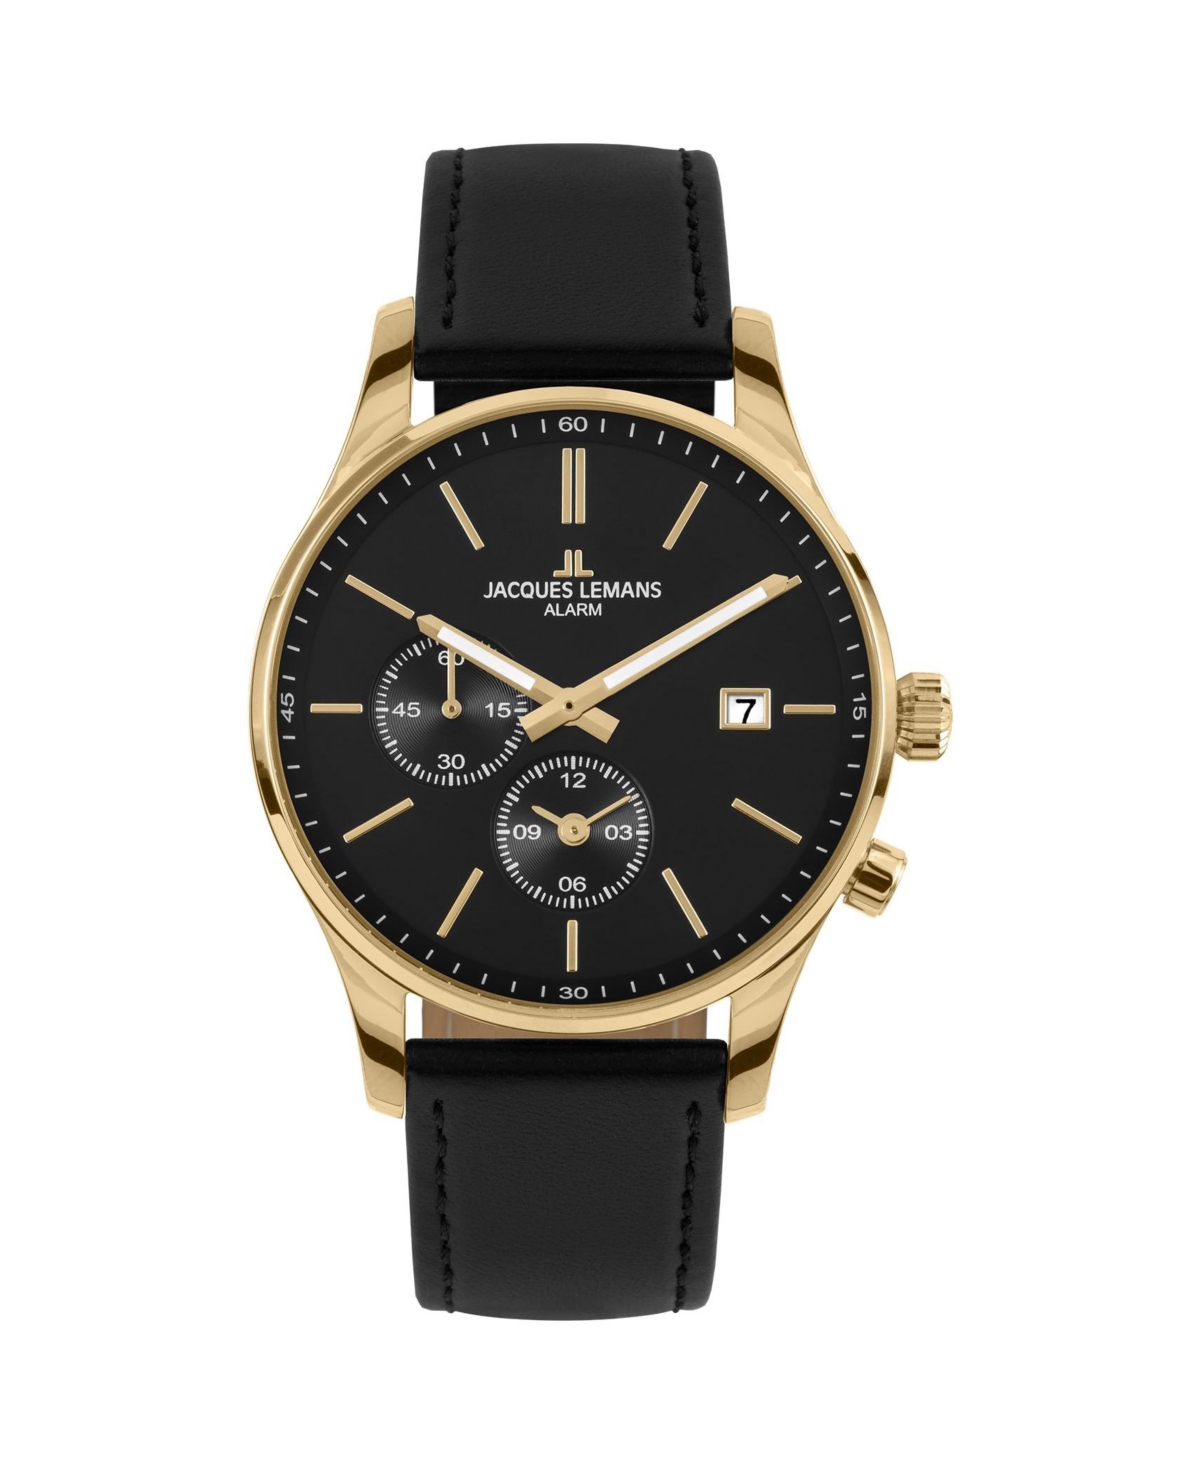 Men's London Watch with Leather Strap, Solid Stainless Steel Ip Gold, 1-2125 - Black